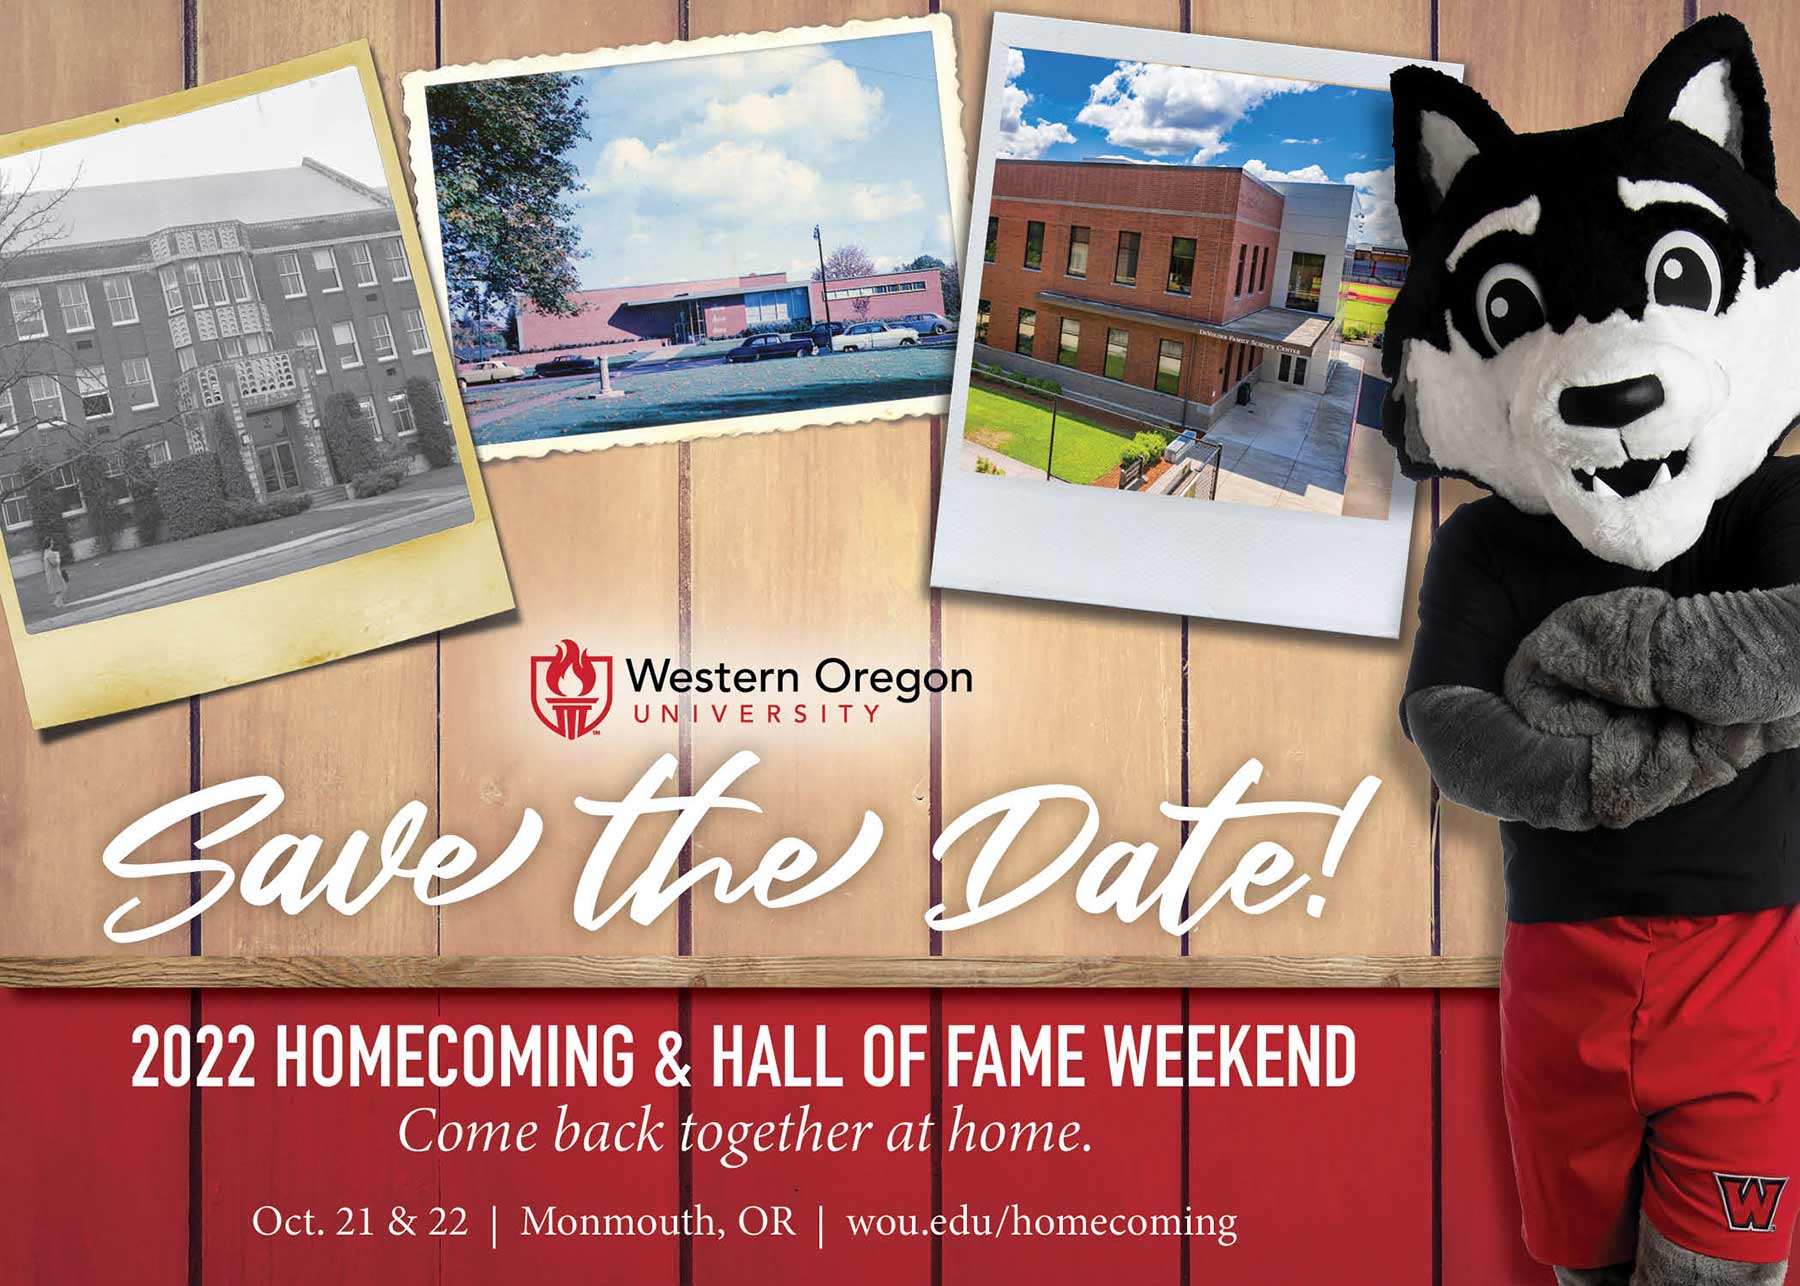 Save the Date! 2022 Homecoming and Hall of Fame weekend. Come back together at home. Oct. 21 and 22